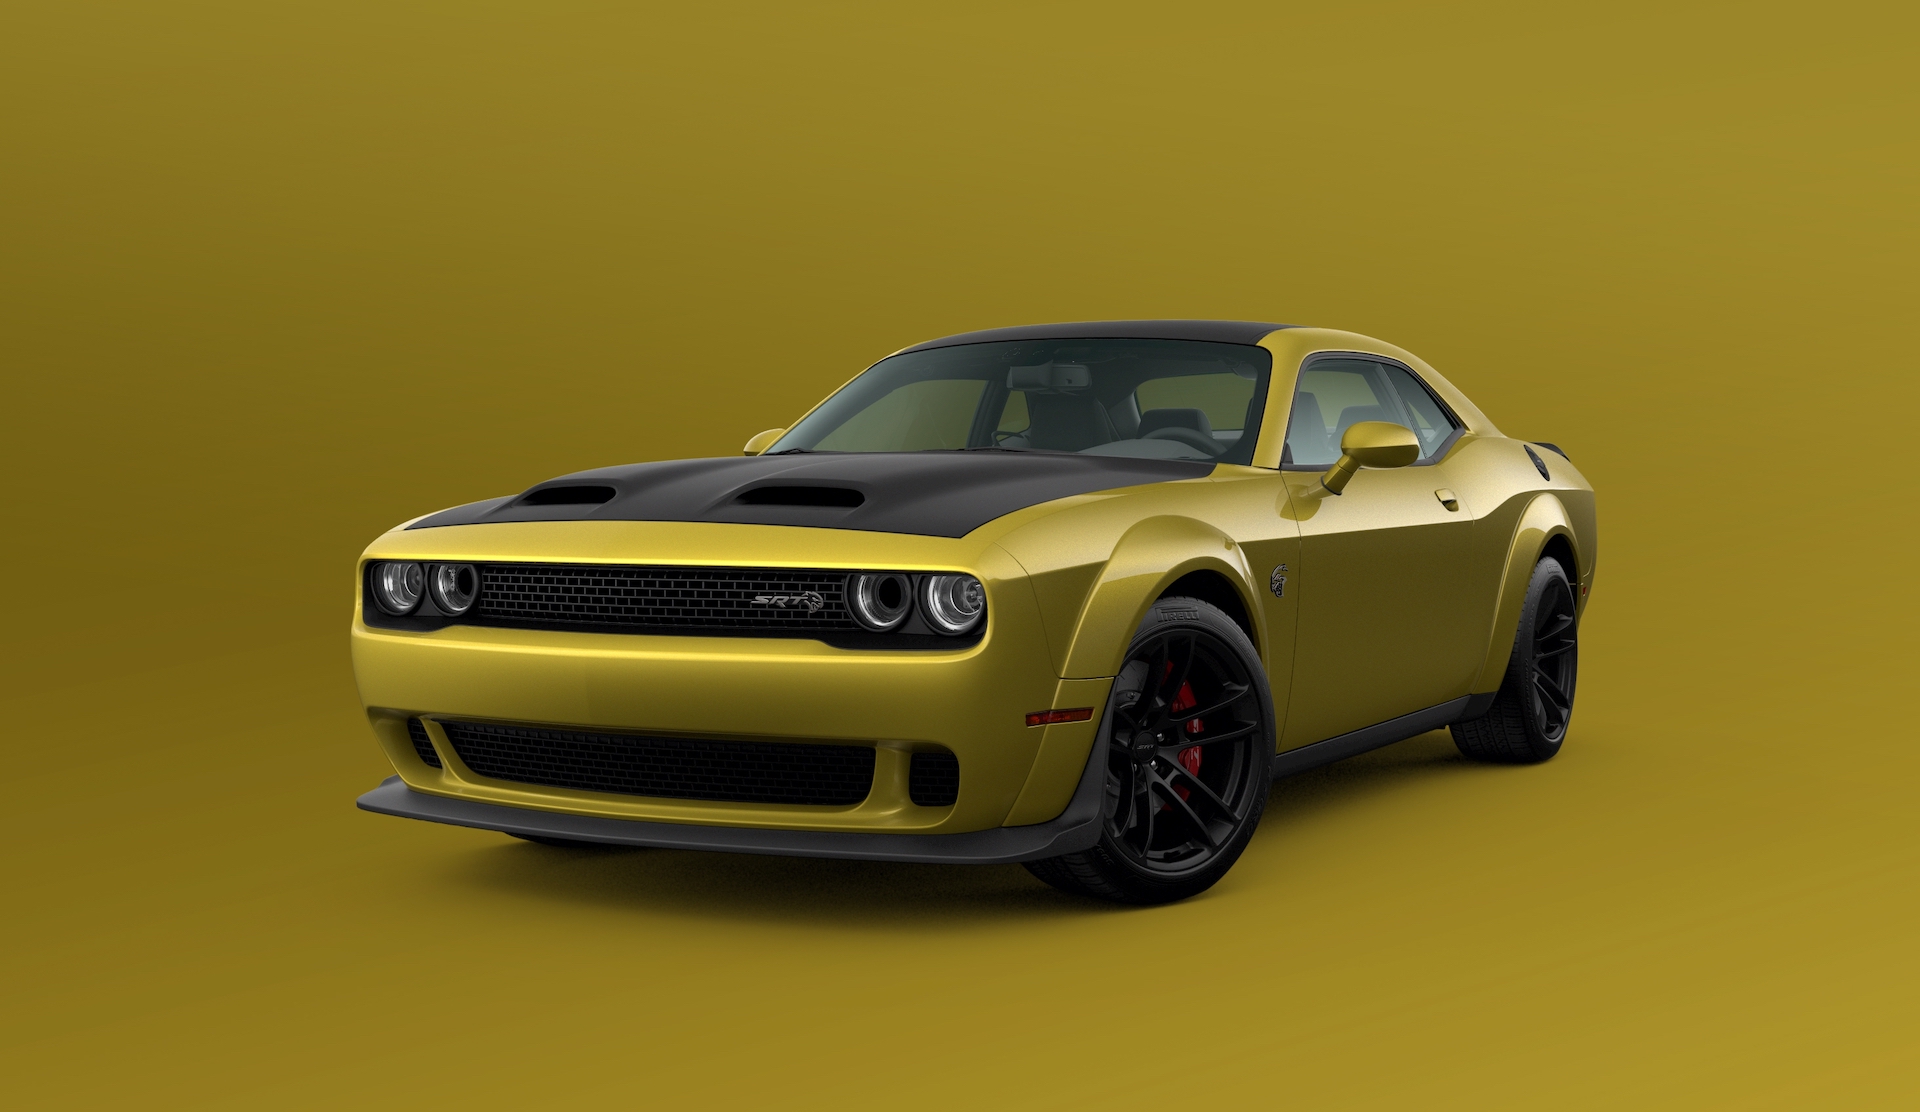 A digital image of a 2021 Dodge Challenger featuring the new Gold Rush paint color.